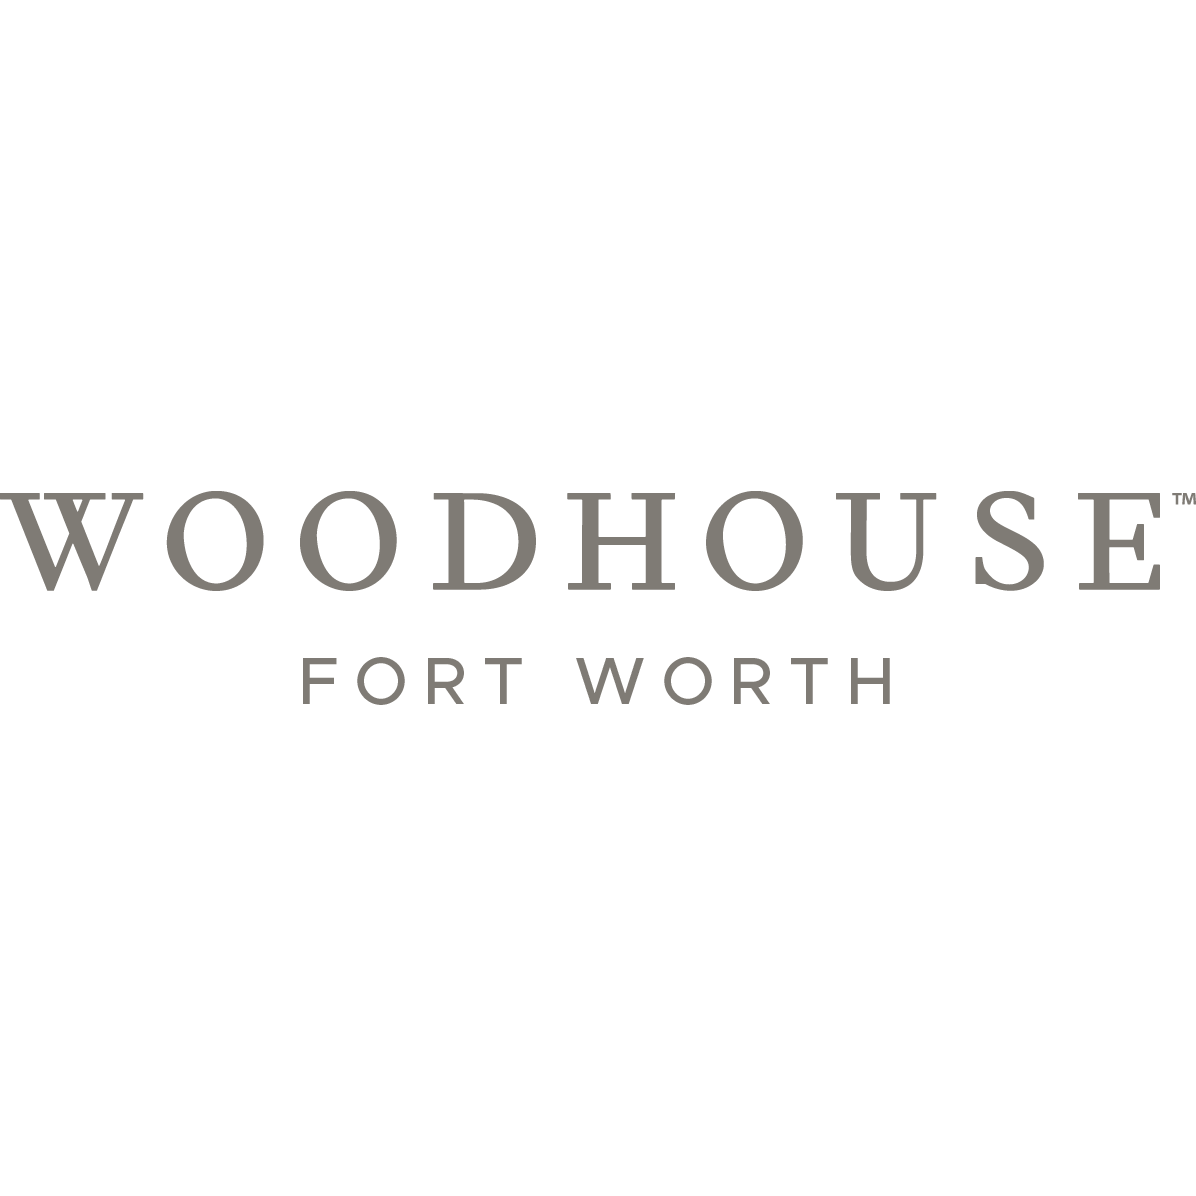 Woodhouse Spa - Fort Worth Logo